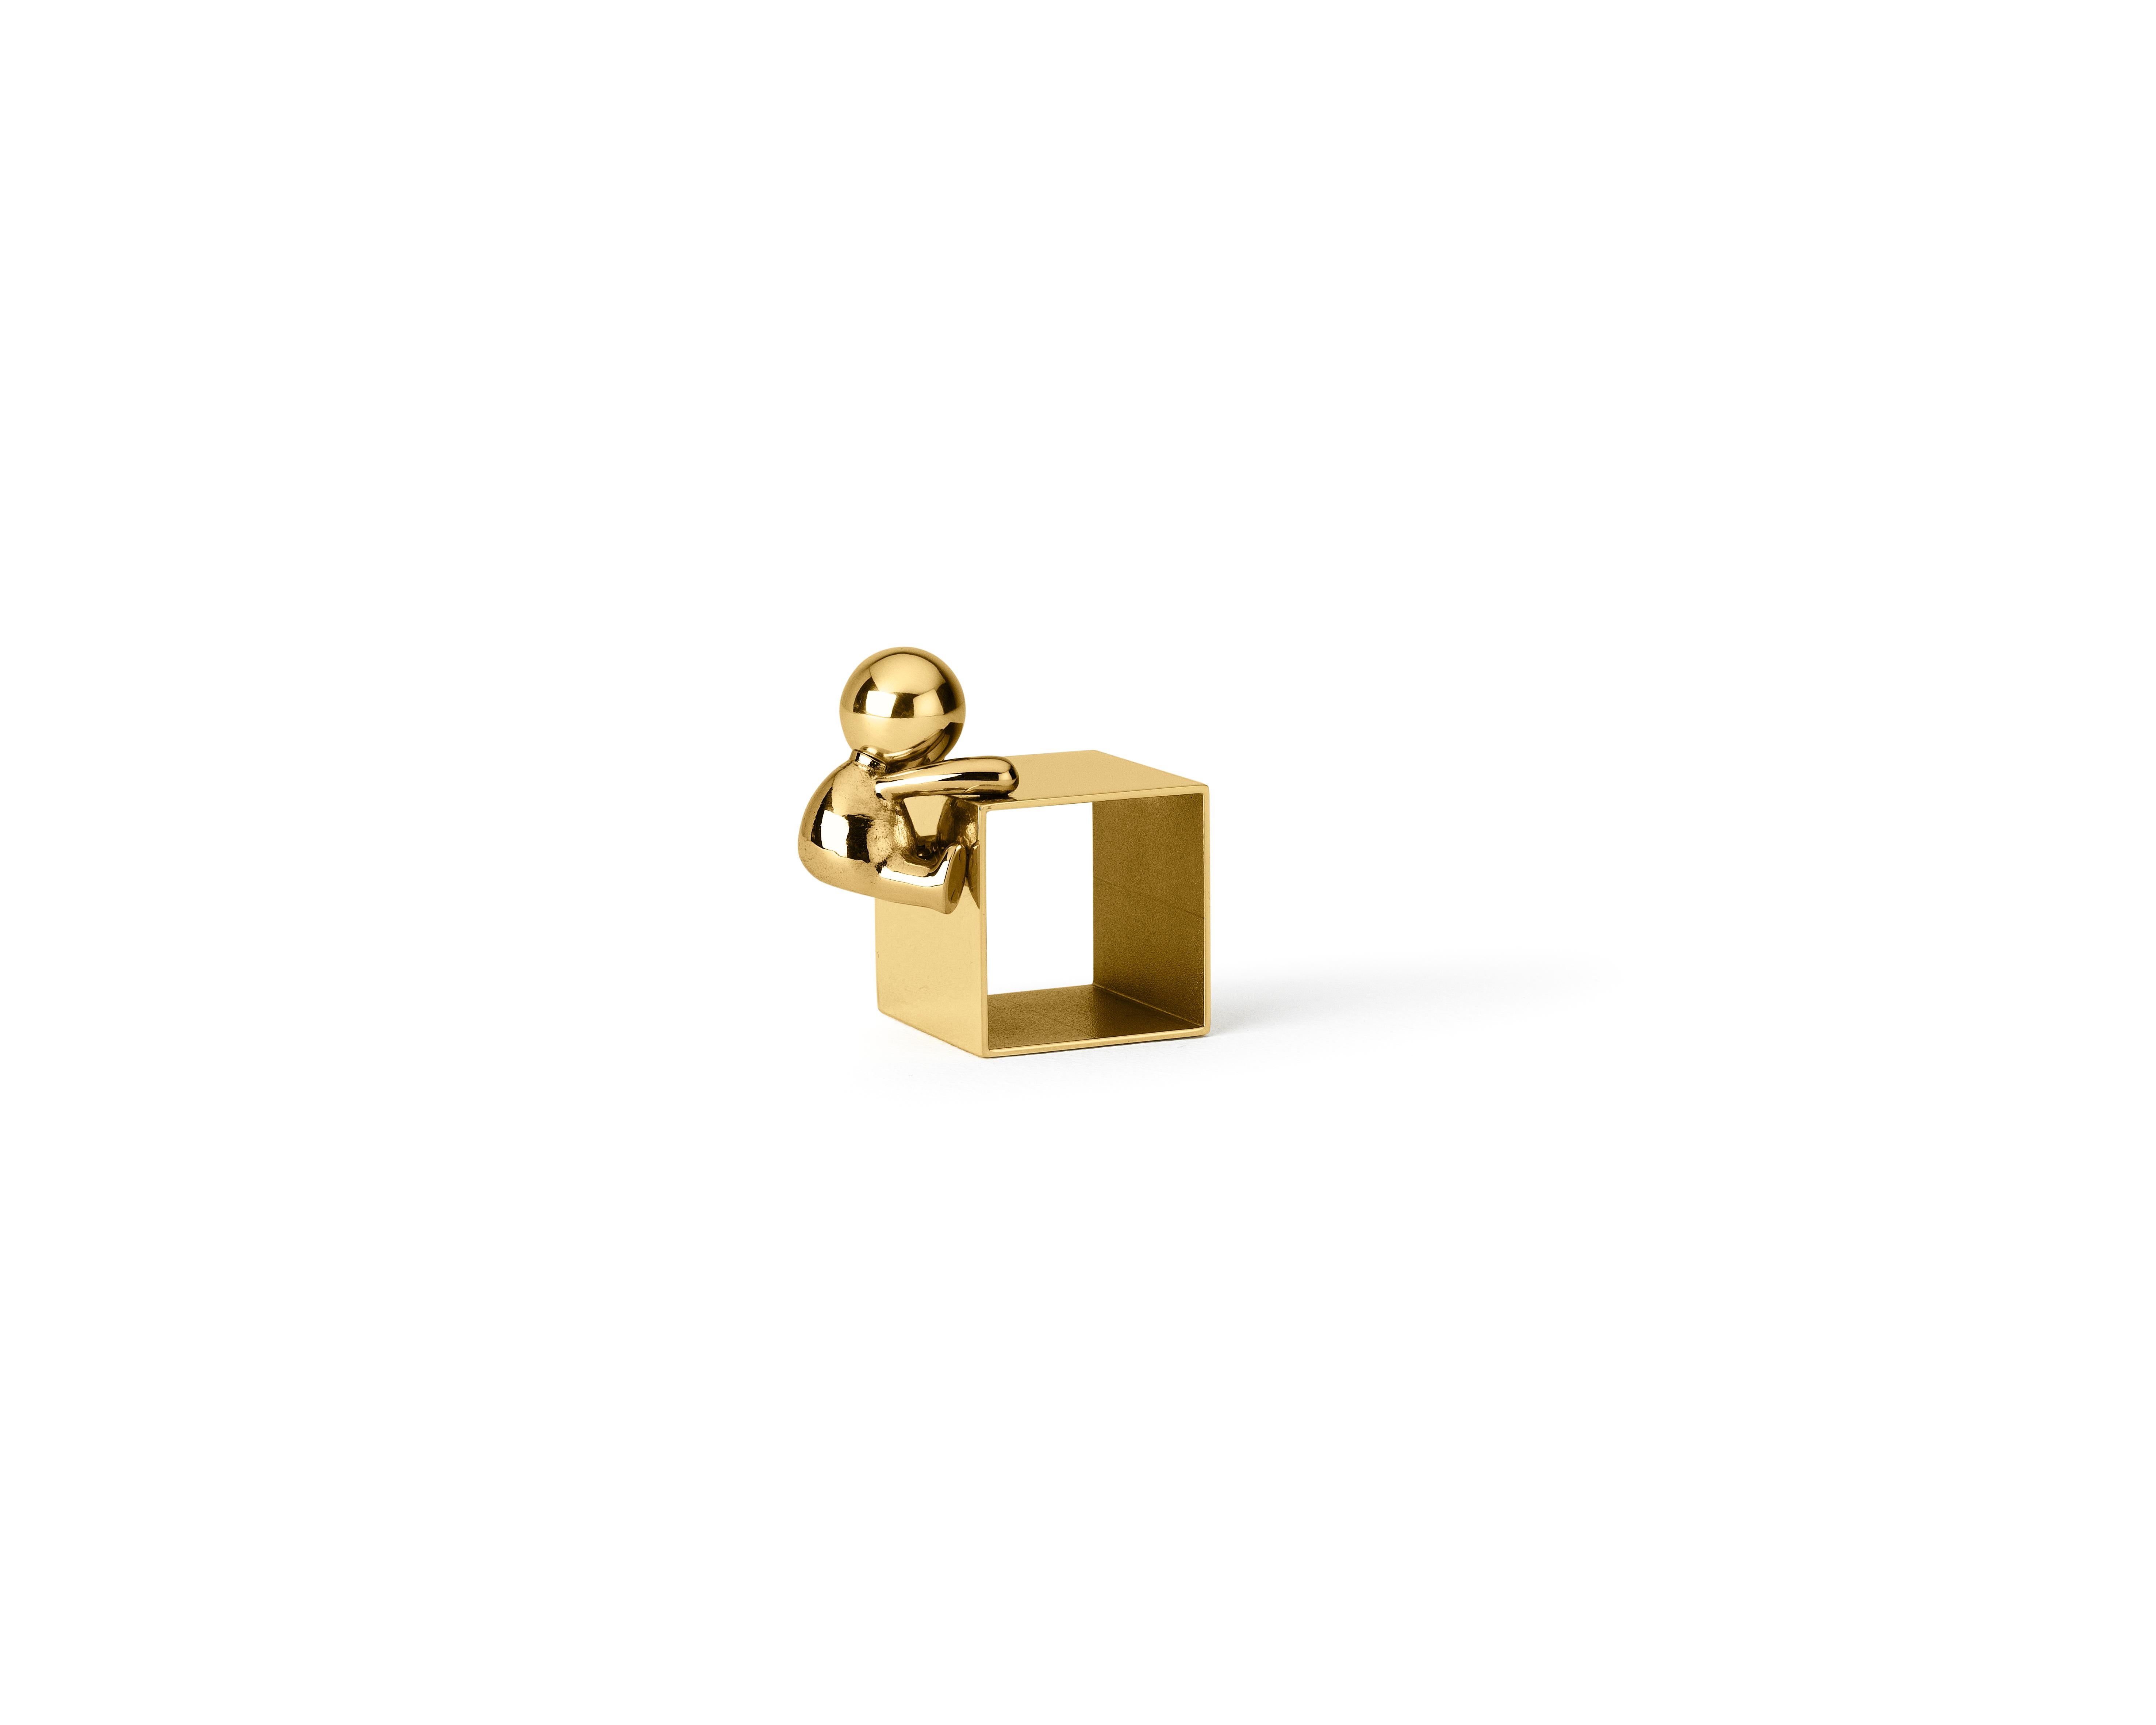 Napkin holder in brass
Omini is a family of products that plays on the inclusion and the relationship between the human figure with a series of monolithic objects from geometric and Minimalist design. Small lilliputians attack and animate the pure